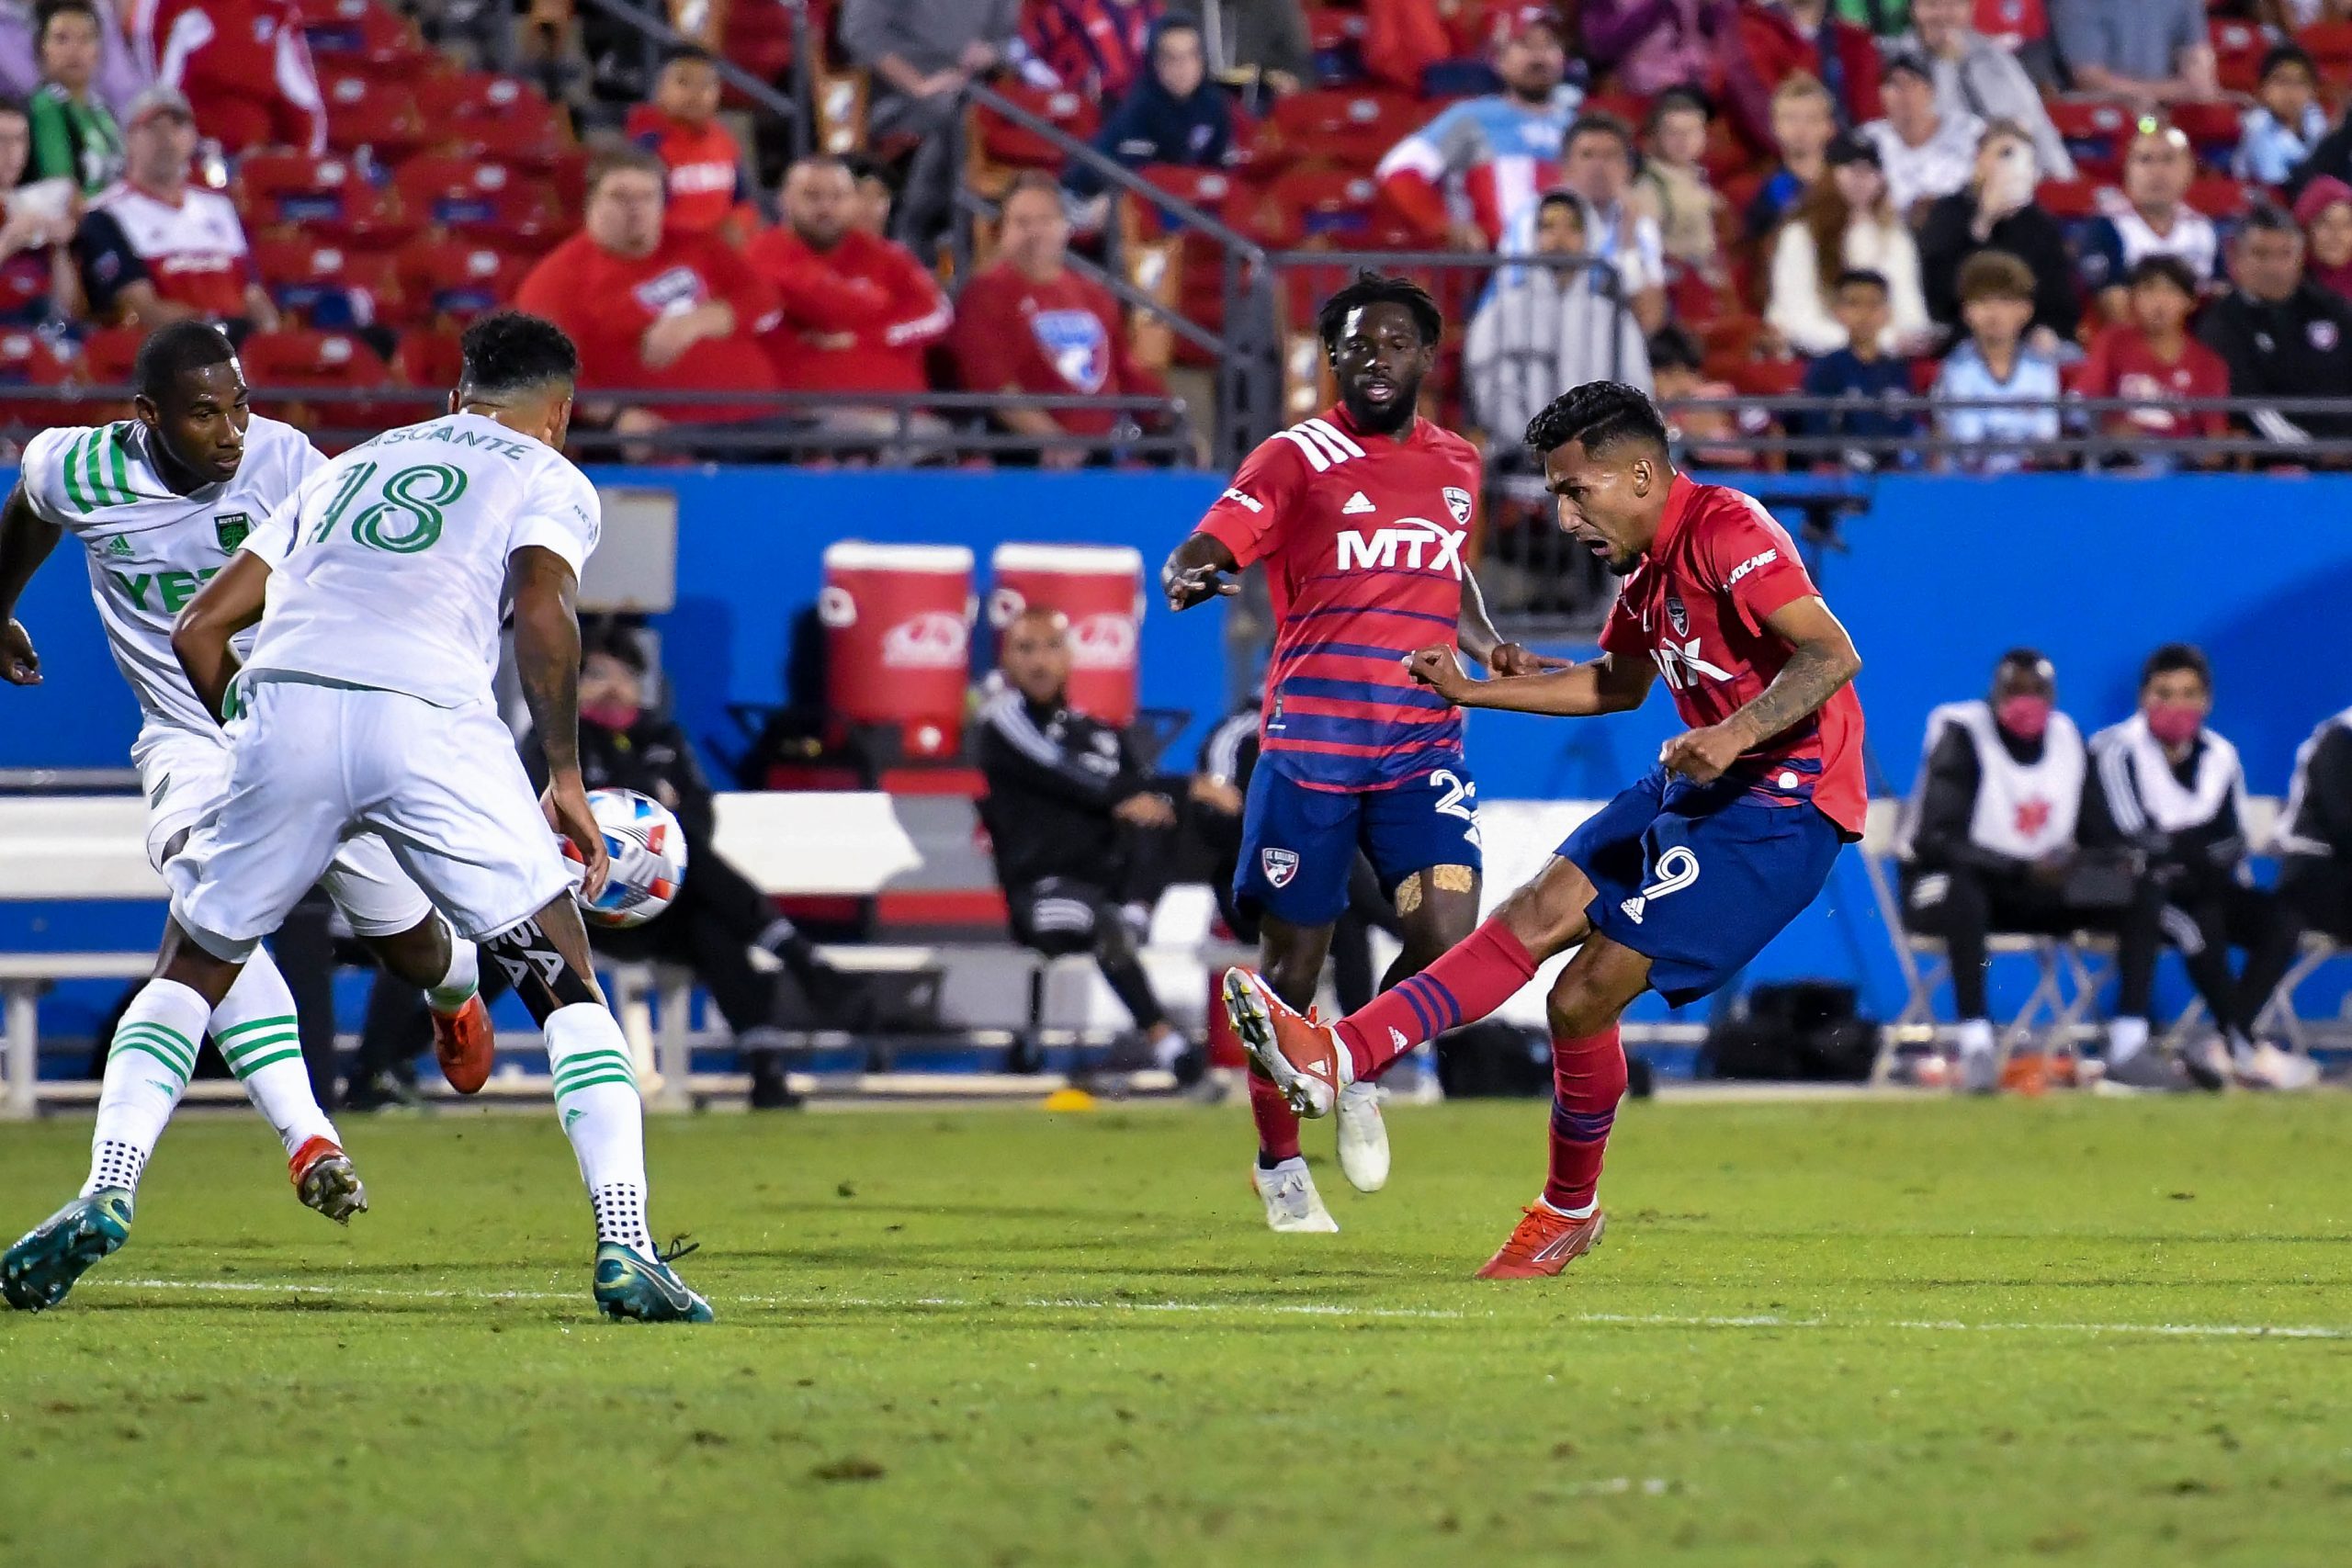 Jesus Ferreira shoots in the MLS match between FC Dallas and Austin FC.